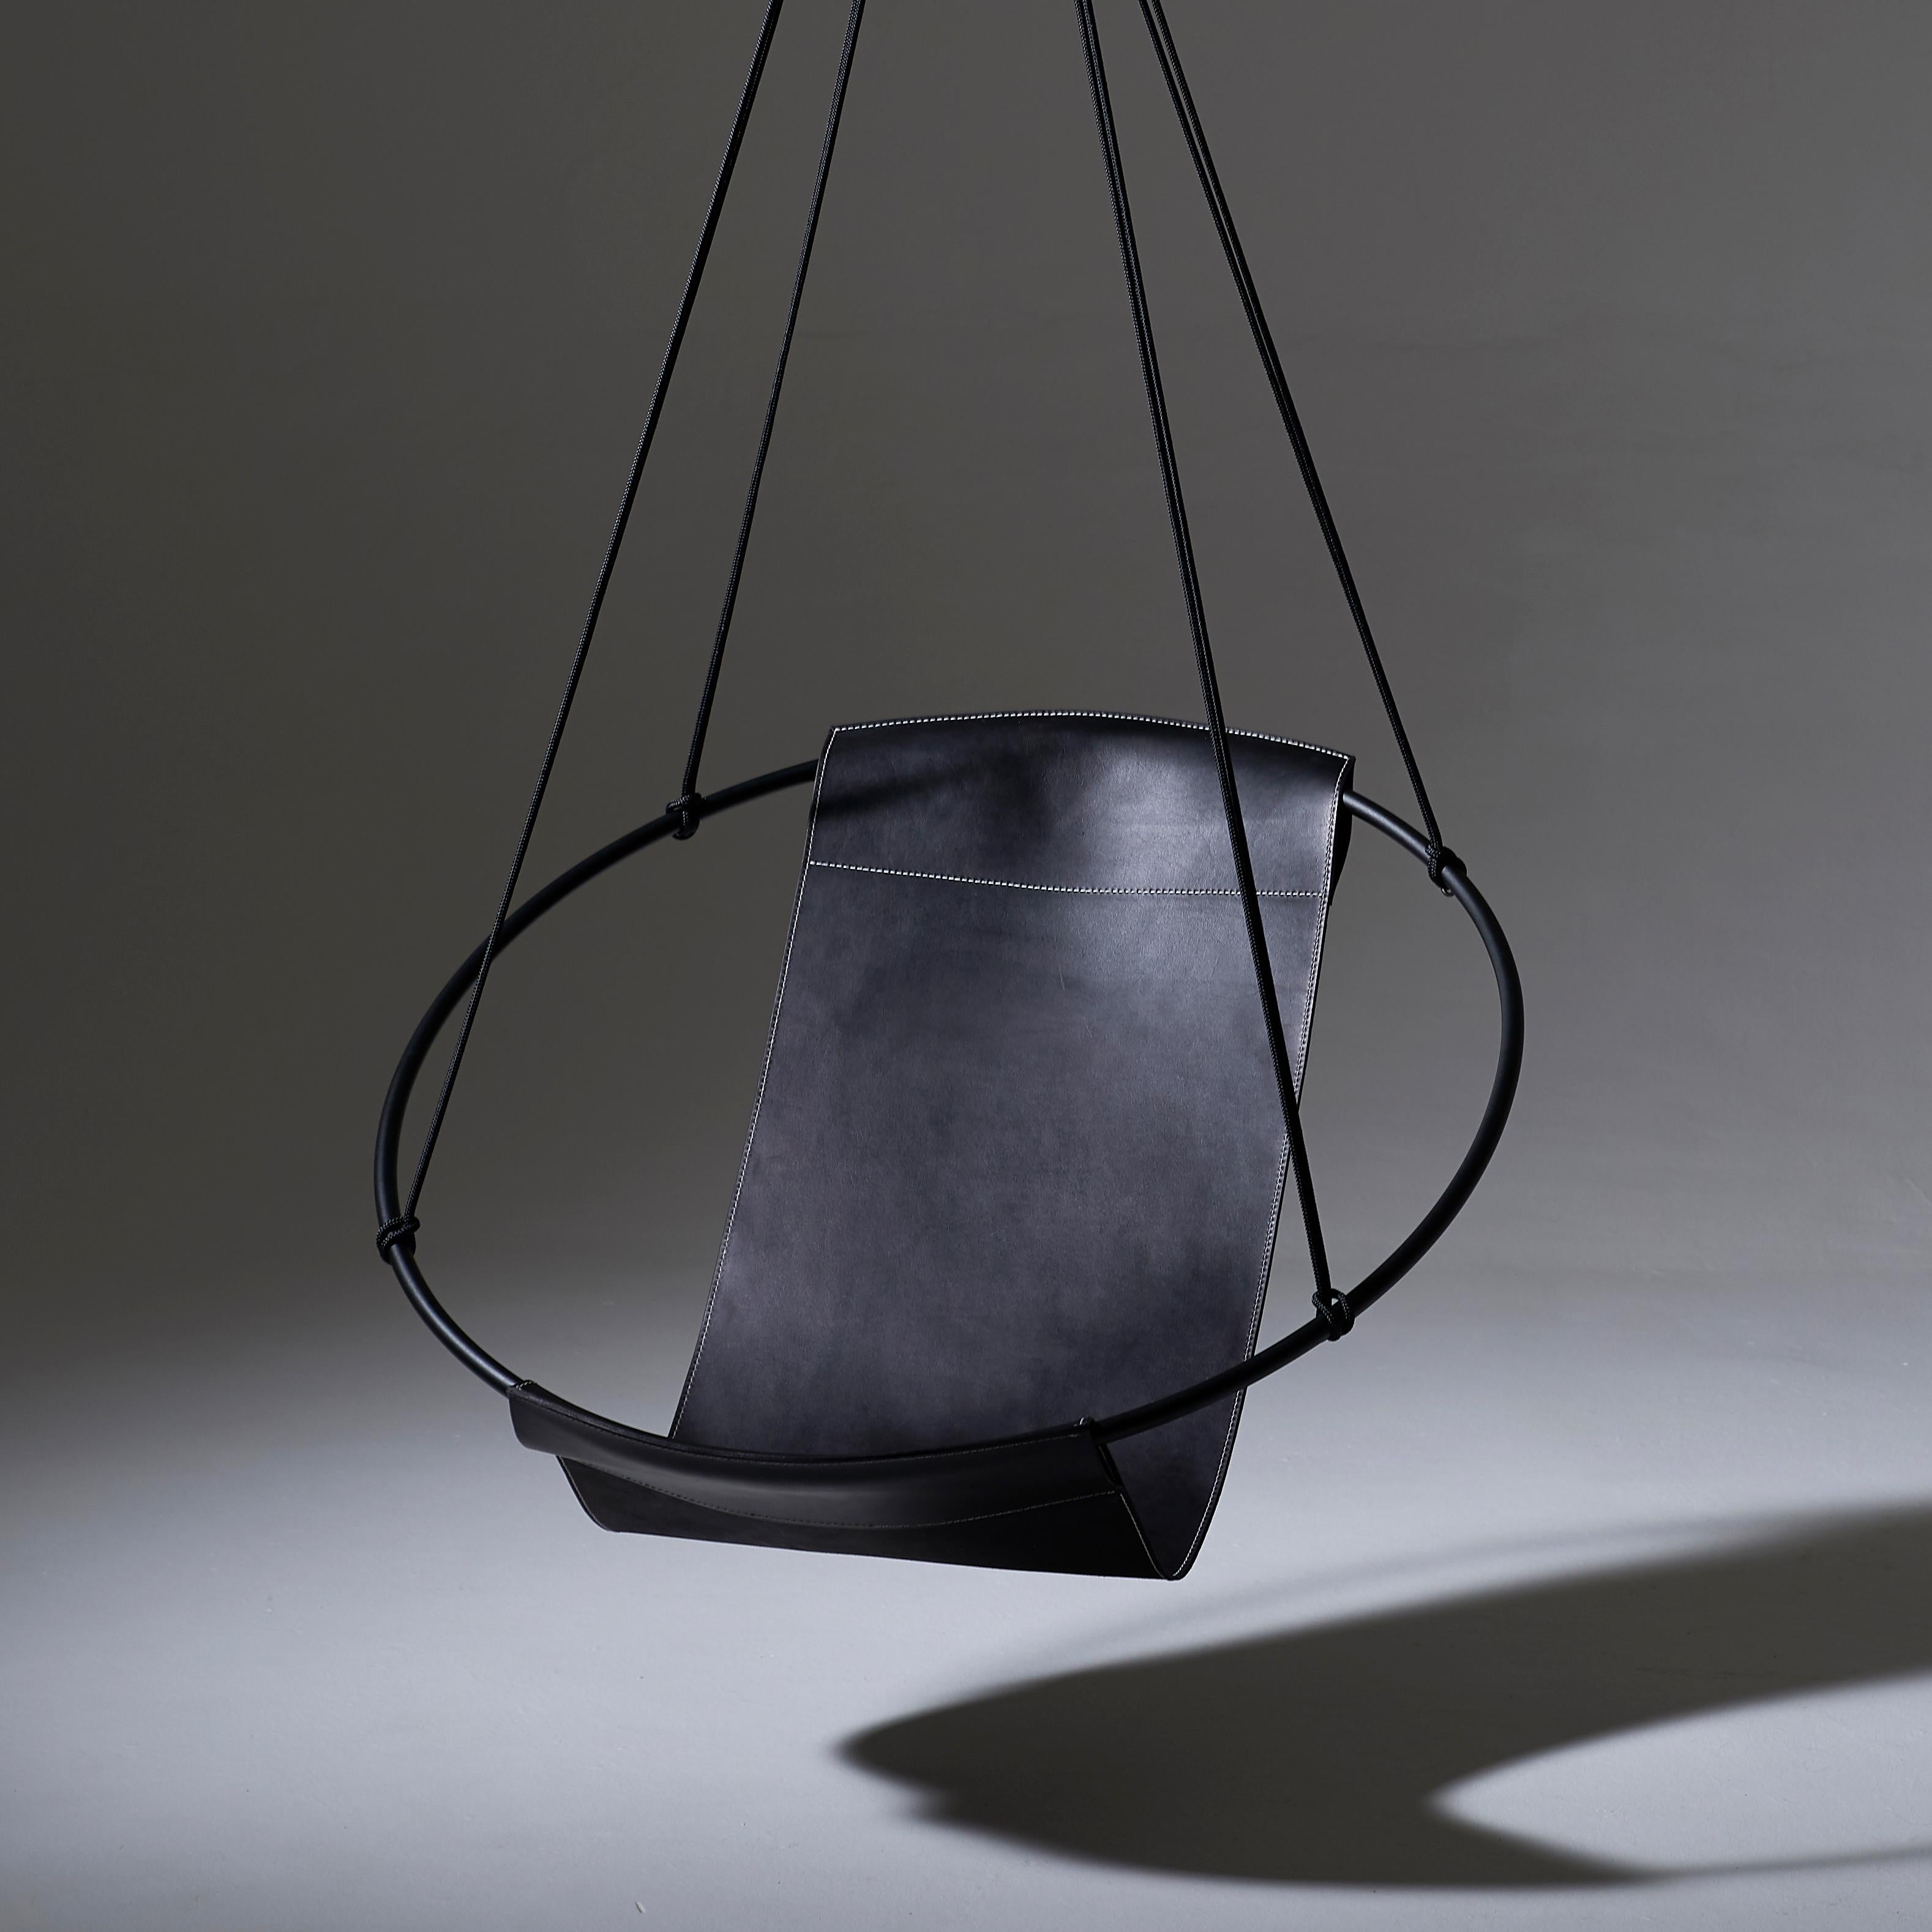 Modern Sling Chair with Genuine South African Leather in Black For Sale 2